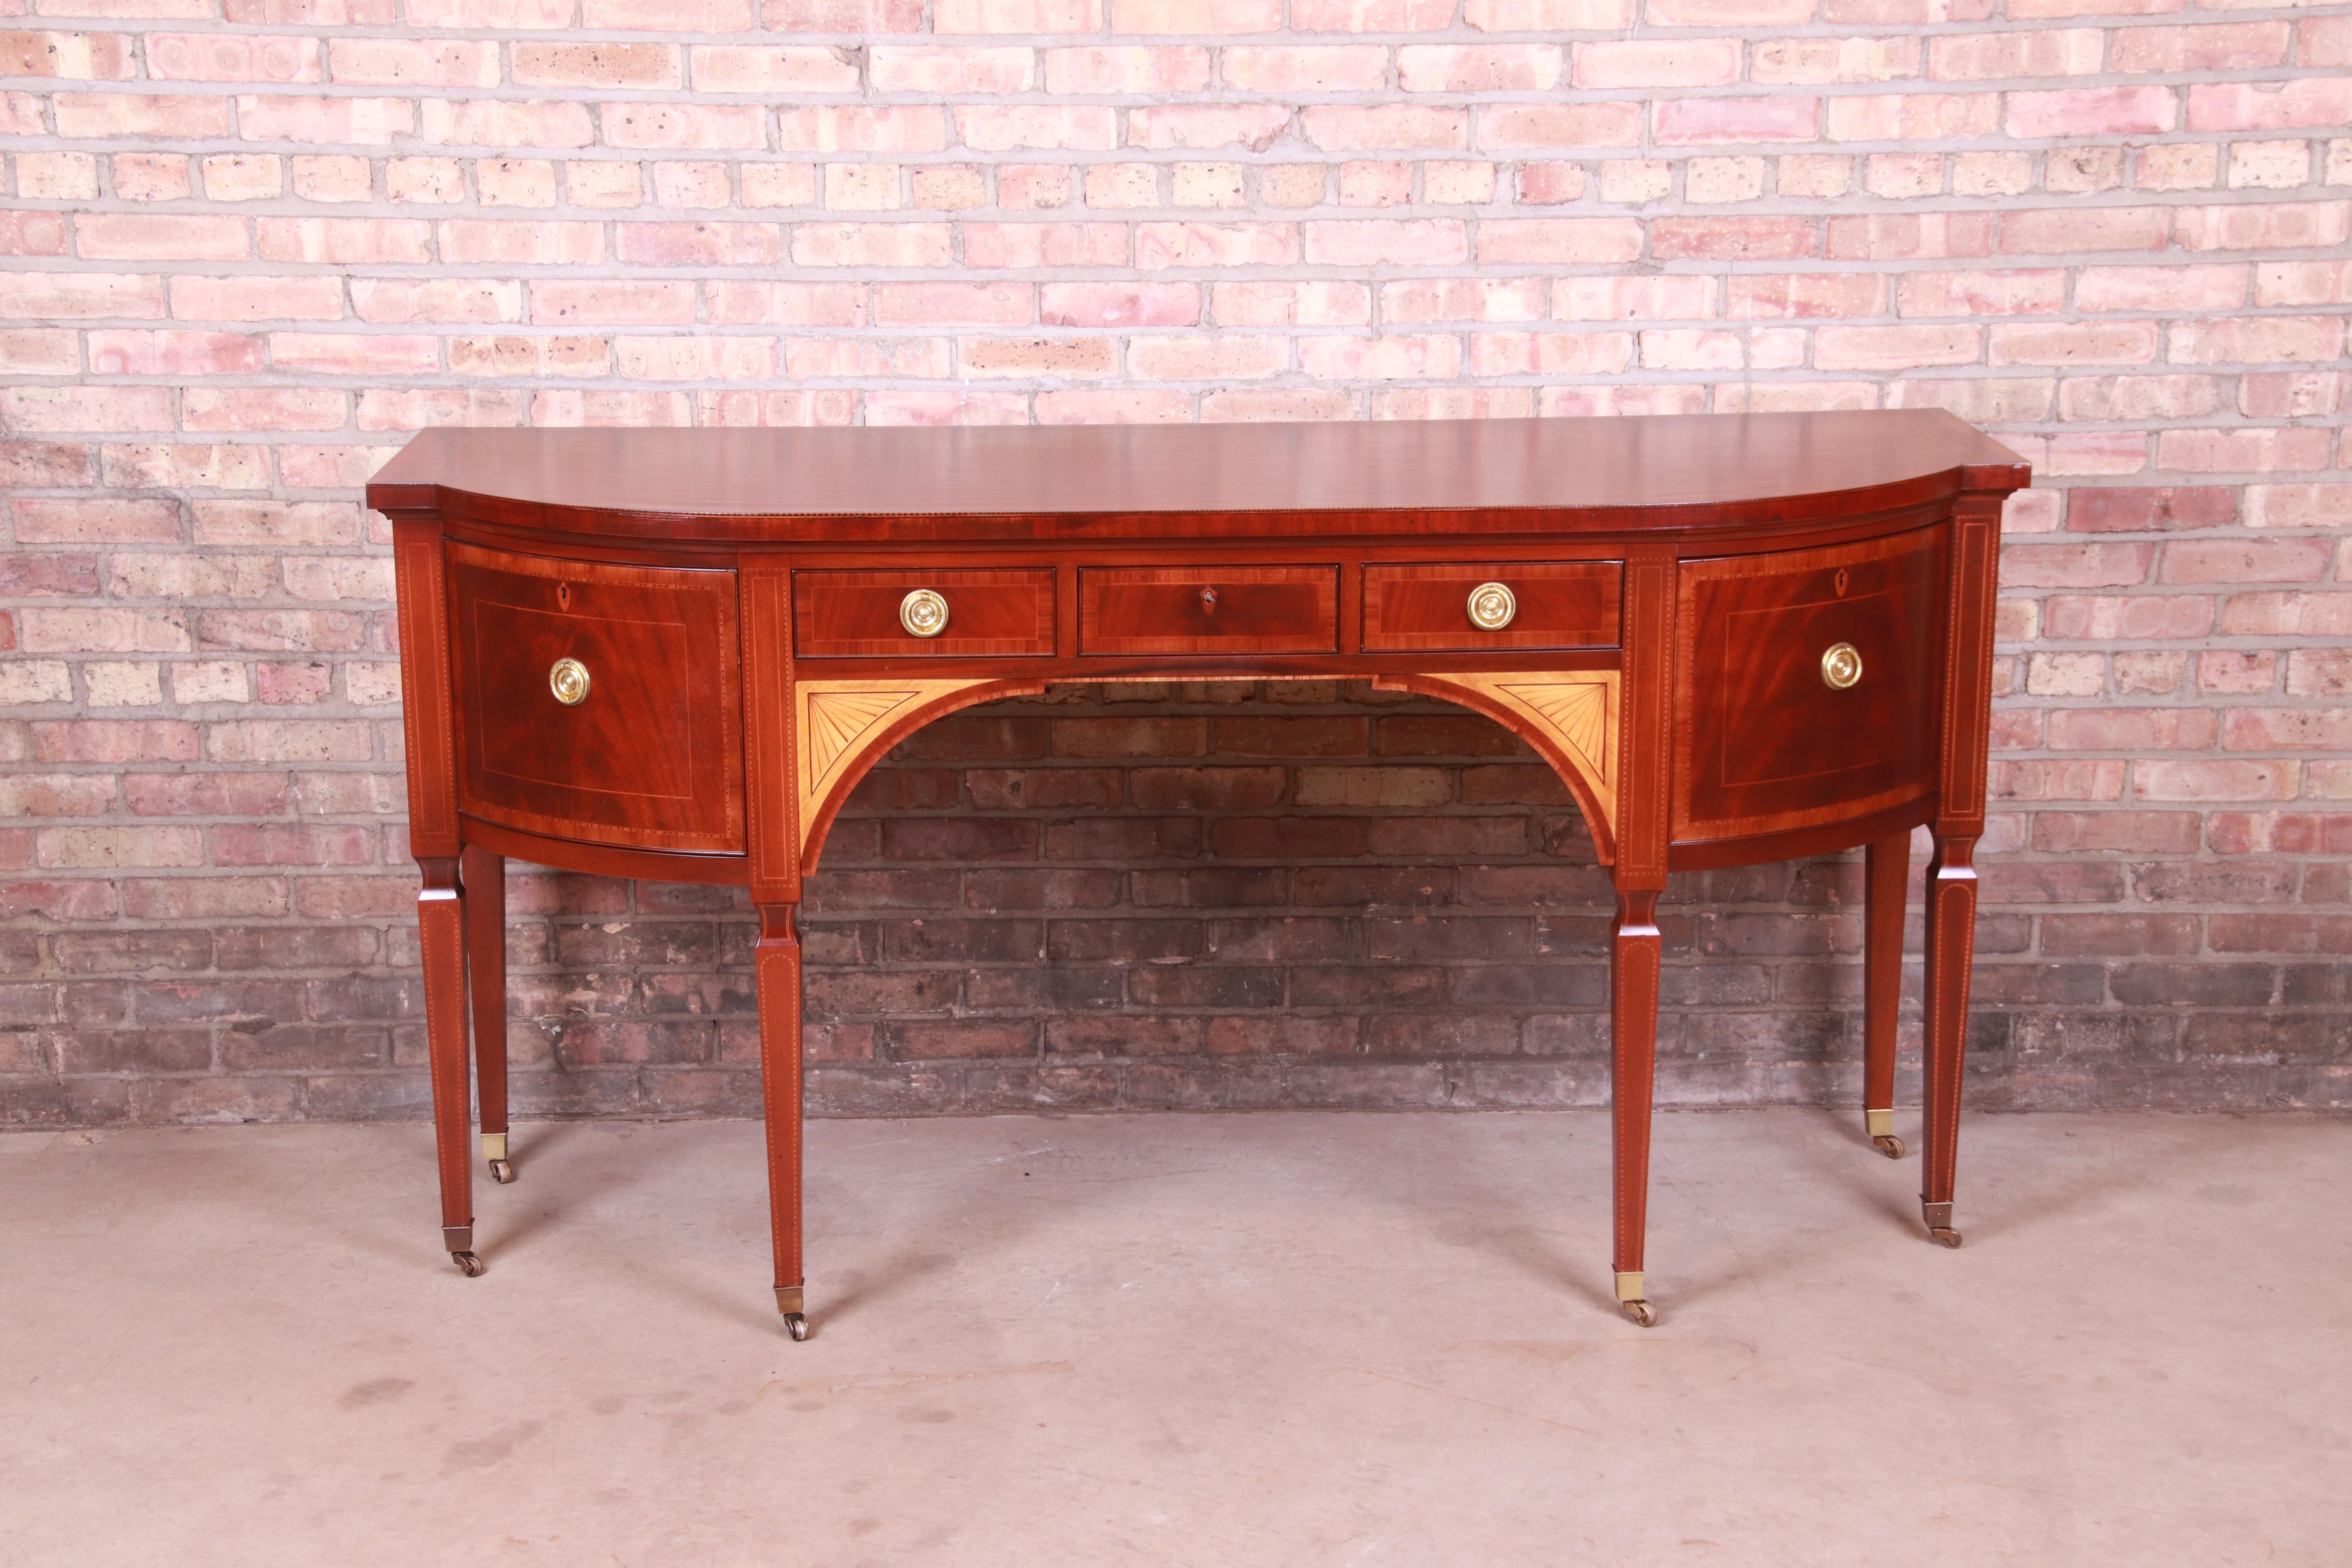 A rare and exceptional Sheraton bow-fronted mahogany sideboard from the exclusive Stately Homes Collection by Baker Furniture.

The sideboard is crossbanded with satinwood and tulipwood and inlaid with chequer pattern bands and stringing and with